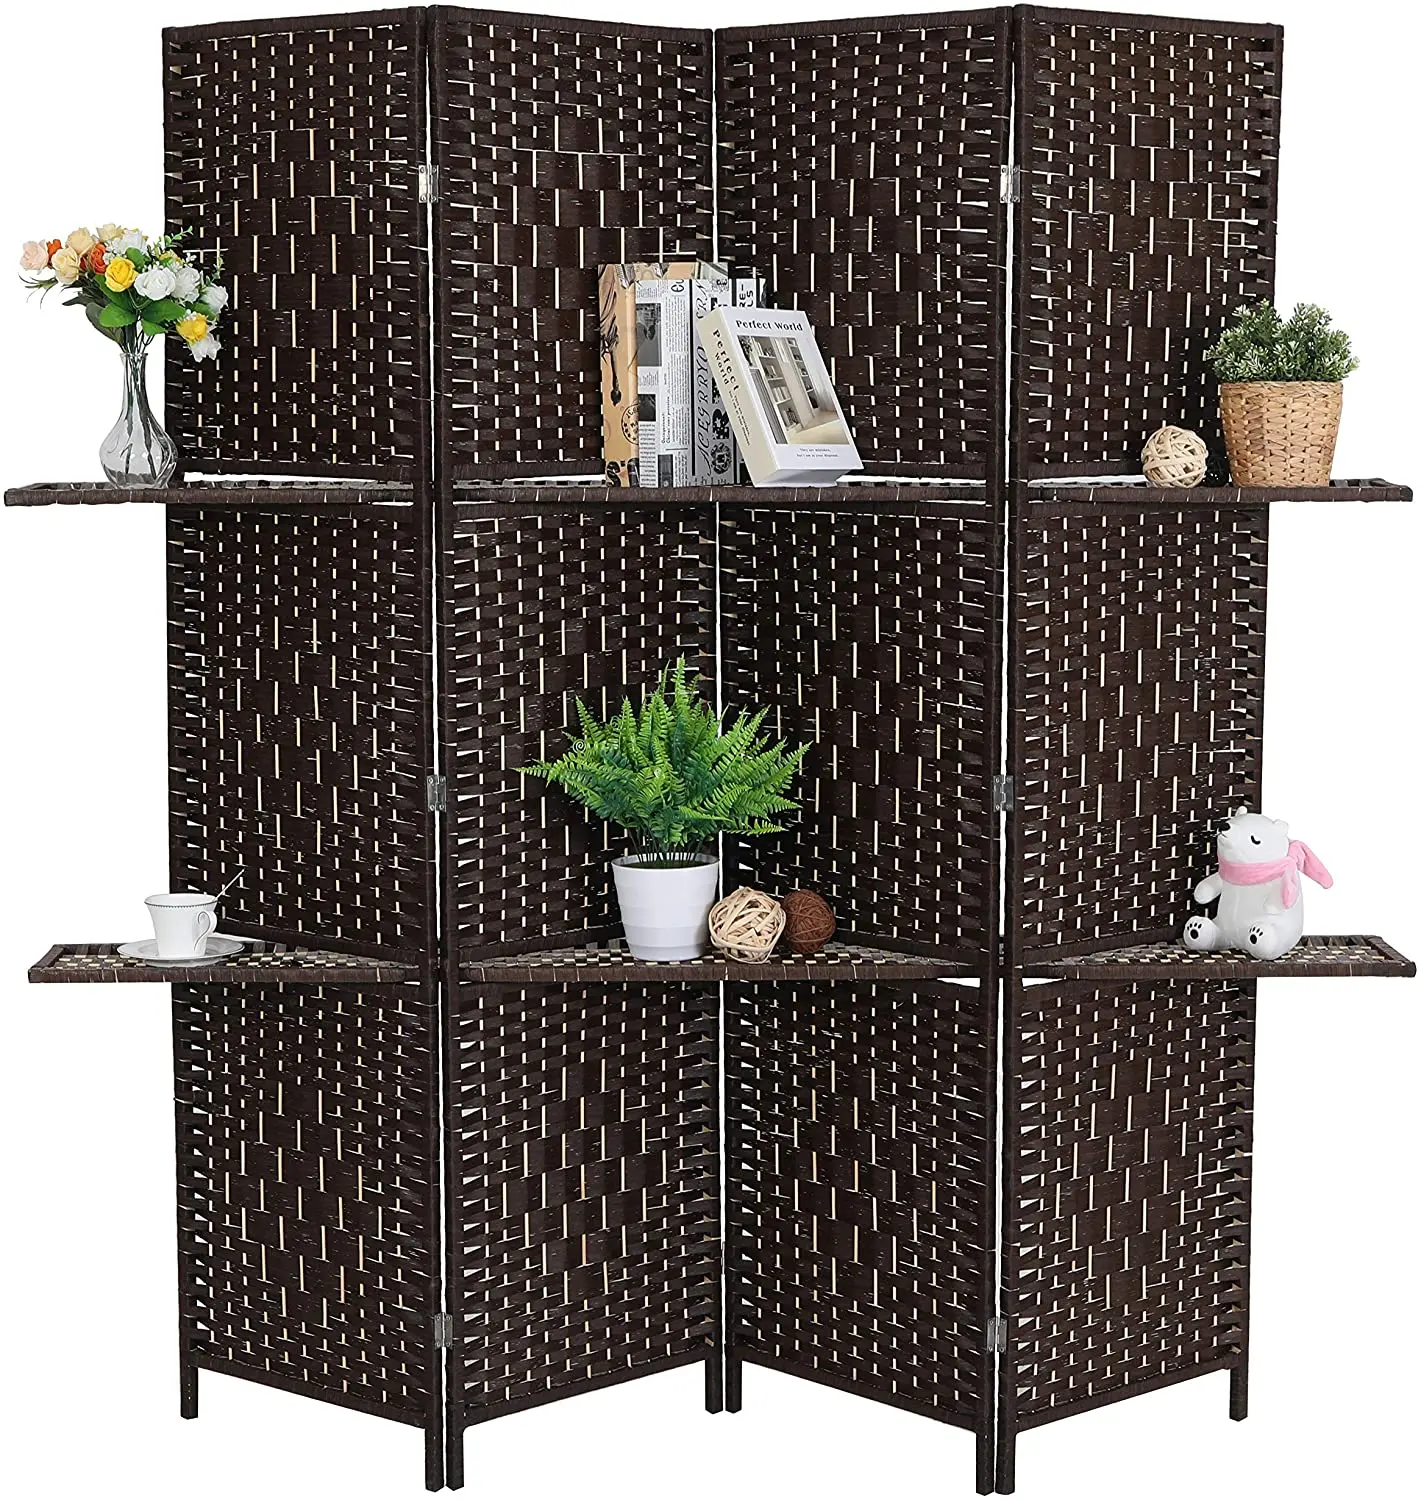 Stand Wall Divider Screens & Room Dividers Wood Movable Plants/flowers Screen Home Decor Folding Screens Chinese